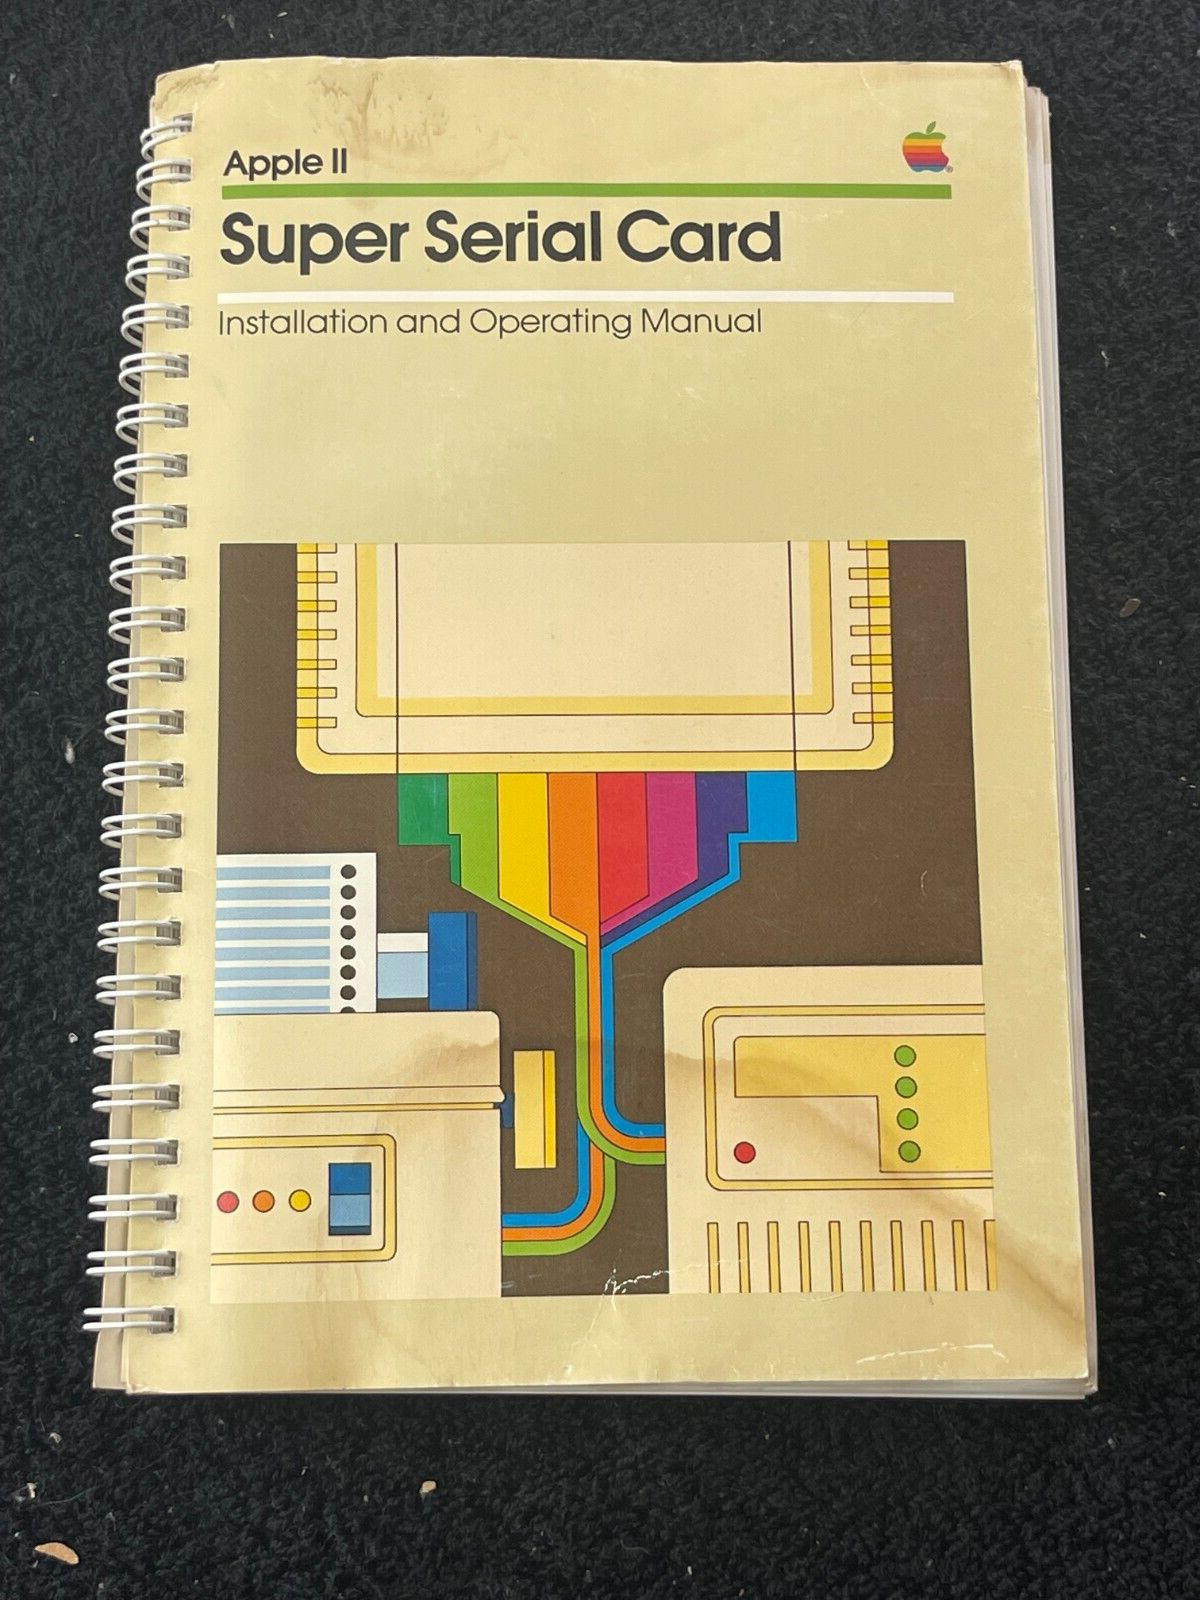 Apple II Super Serial Card Instruction and Operating Manual with Reference Card